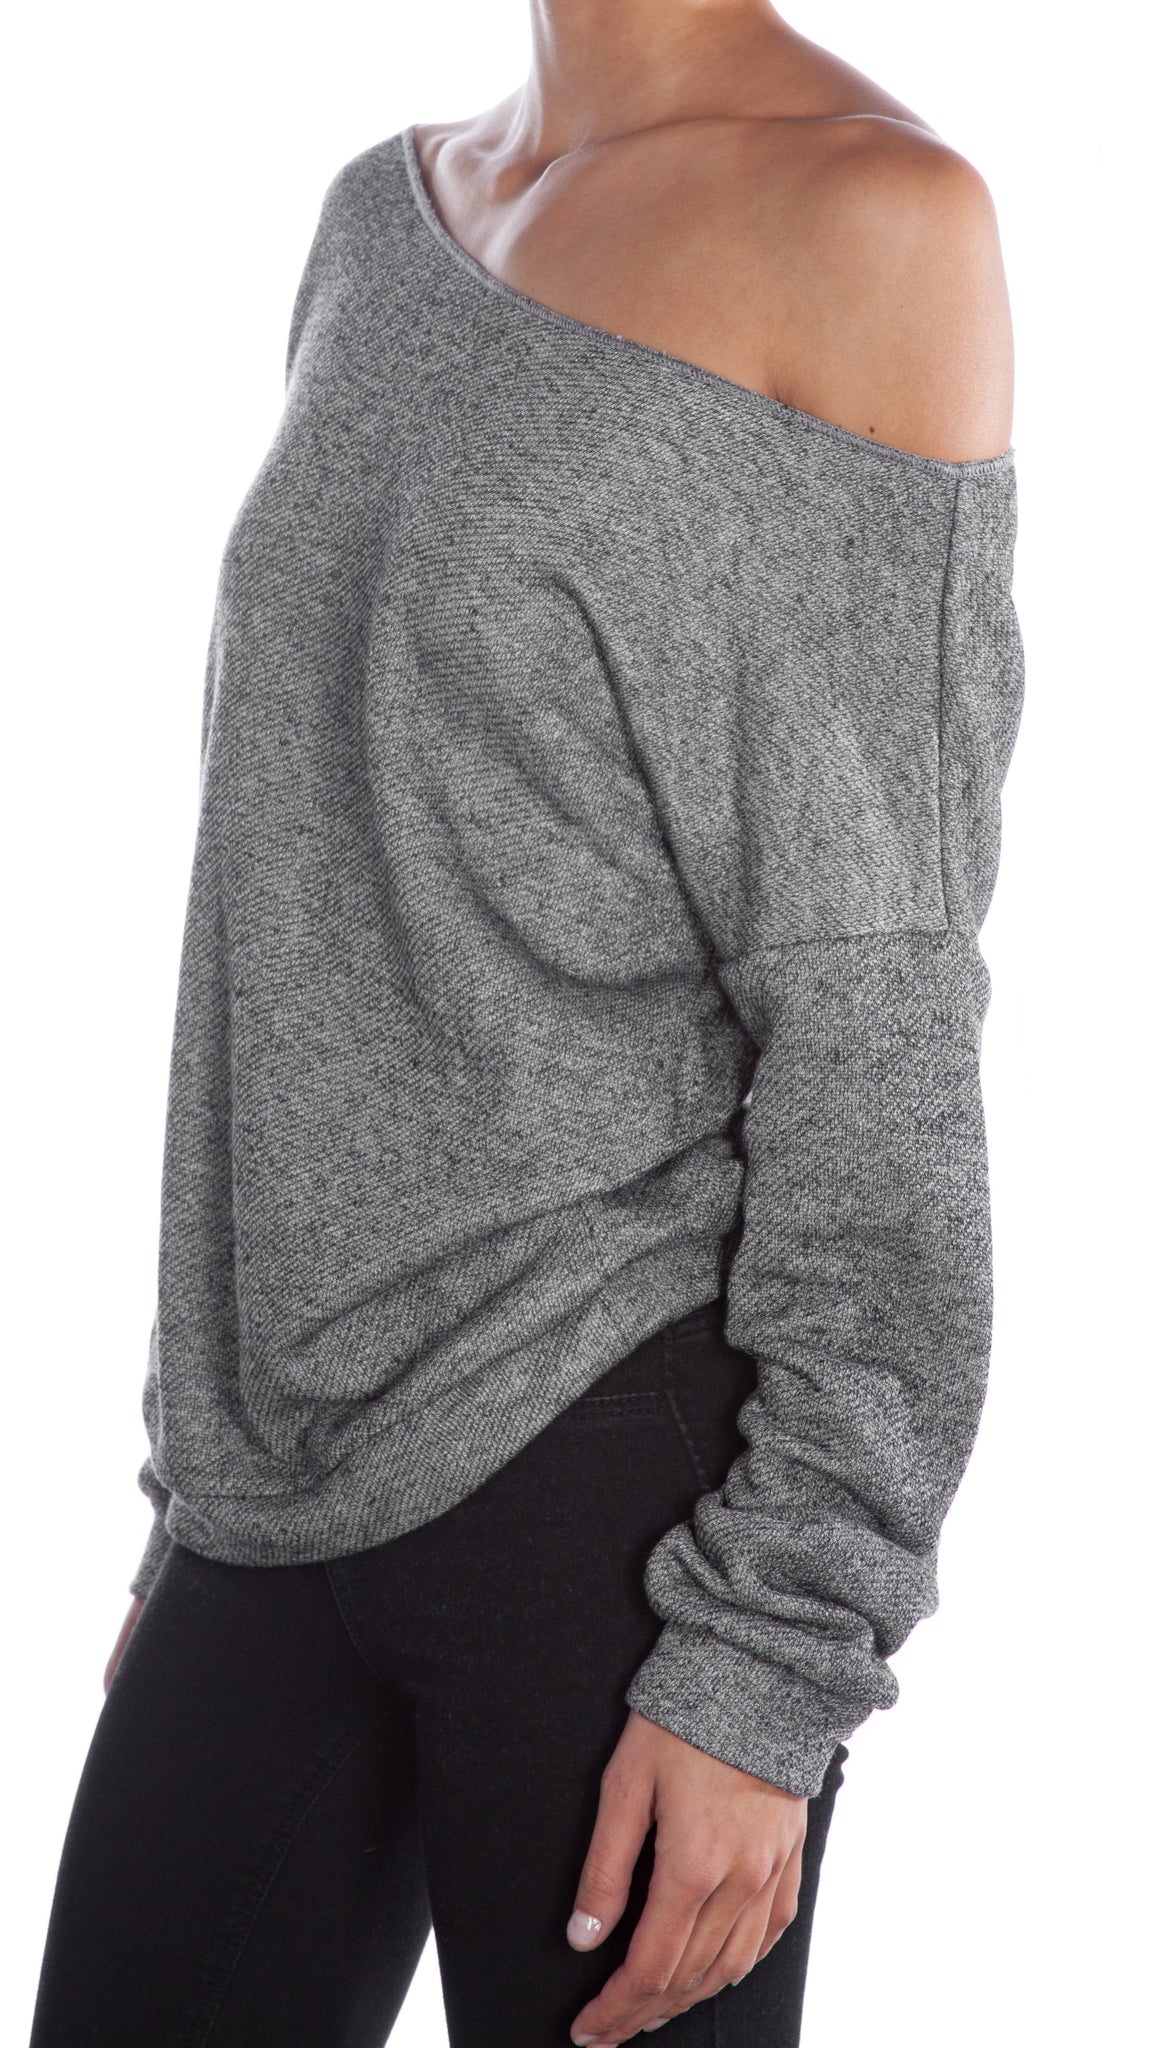 Off The Shoulder Heather Grey Sweatshirt  - by necessary objects